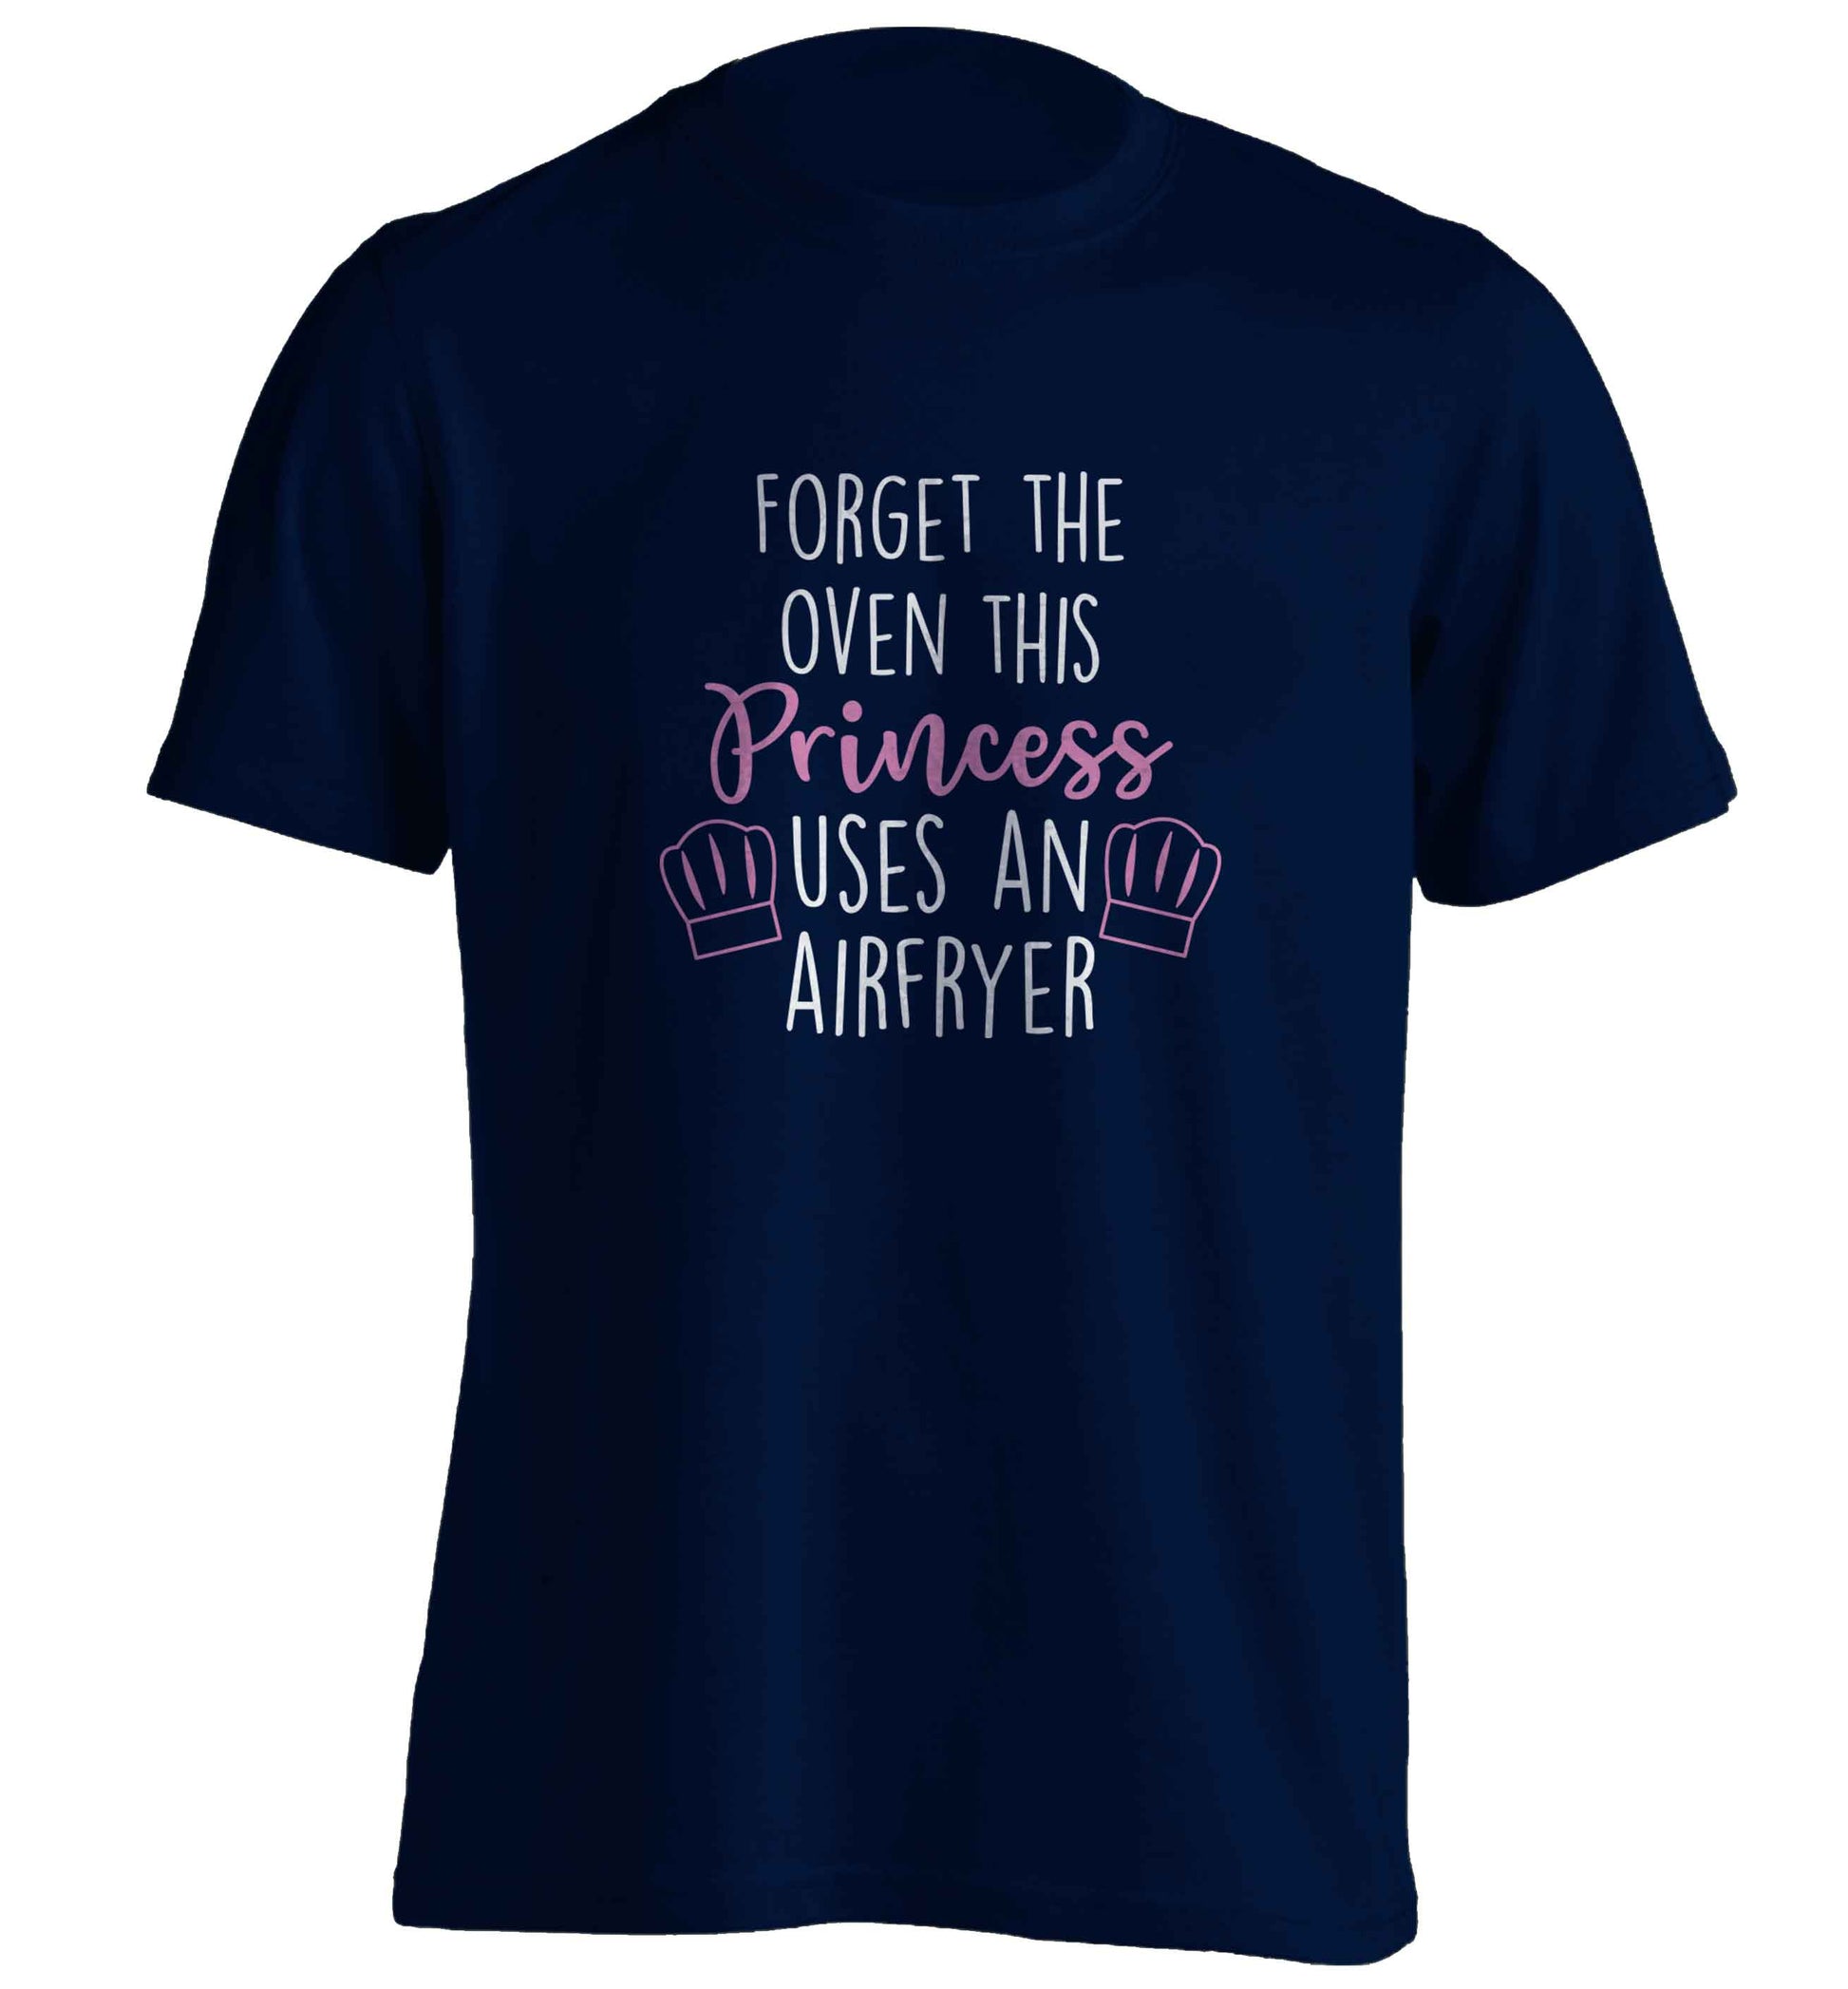 Forget the oven this princess uses an airfryeradults unisex navy Tshirt 2XL